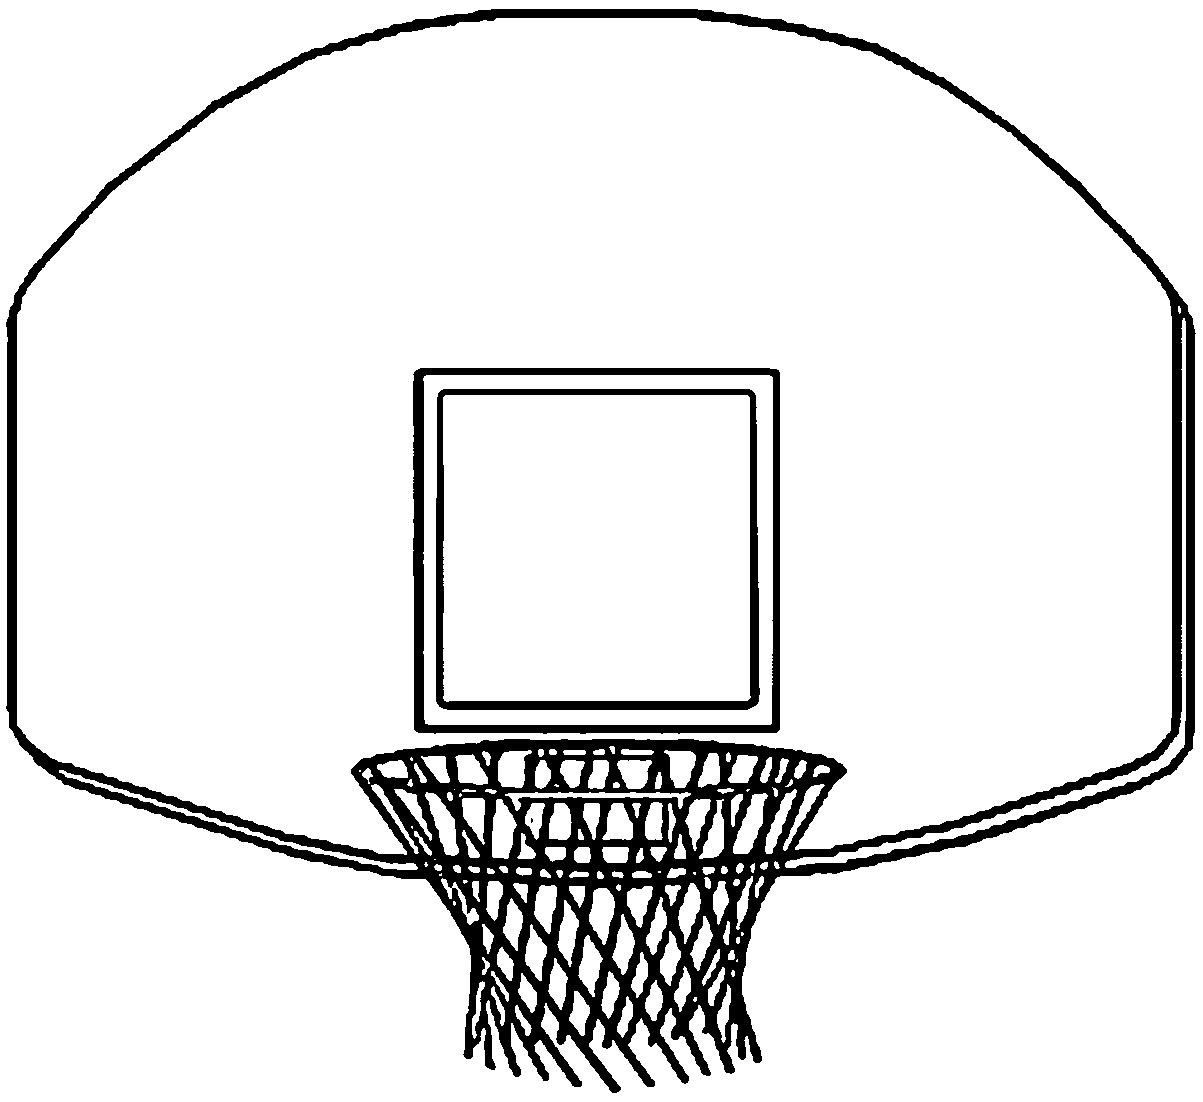 Basketball Net Coloring Page | Wecoloringpage